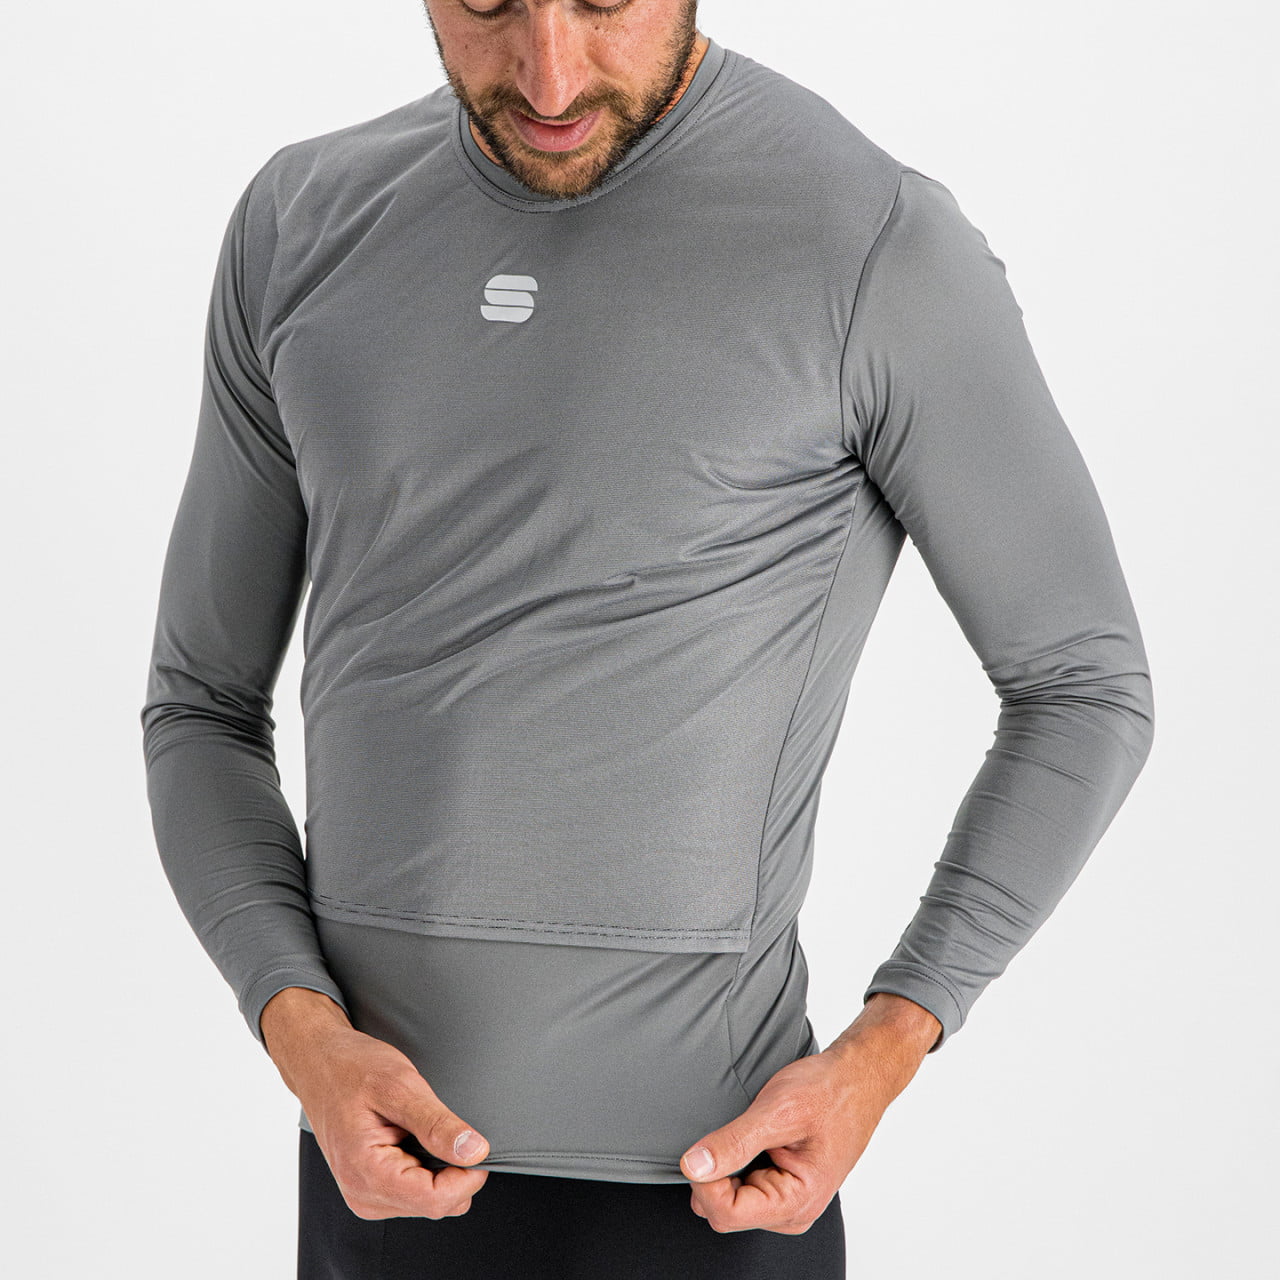 Maillot de corps manches longues Fiandre Thermal